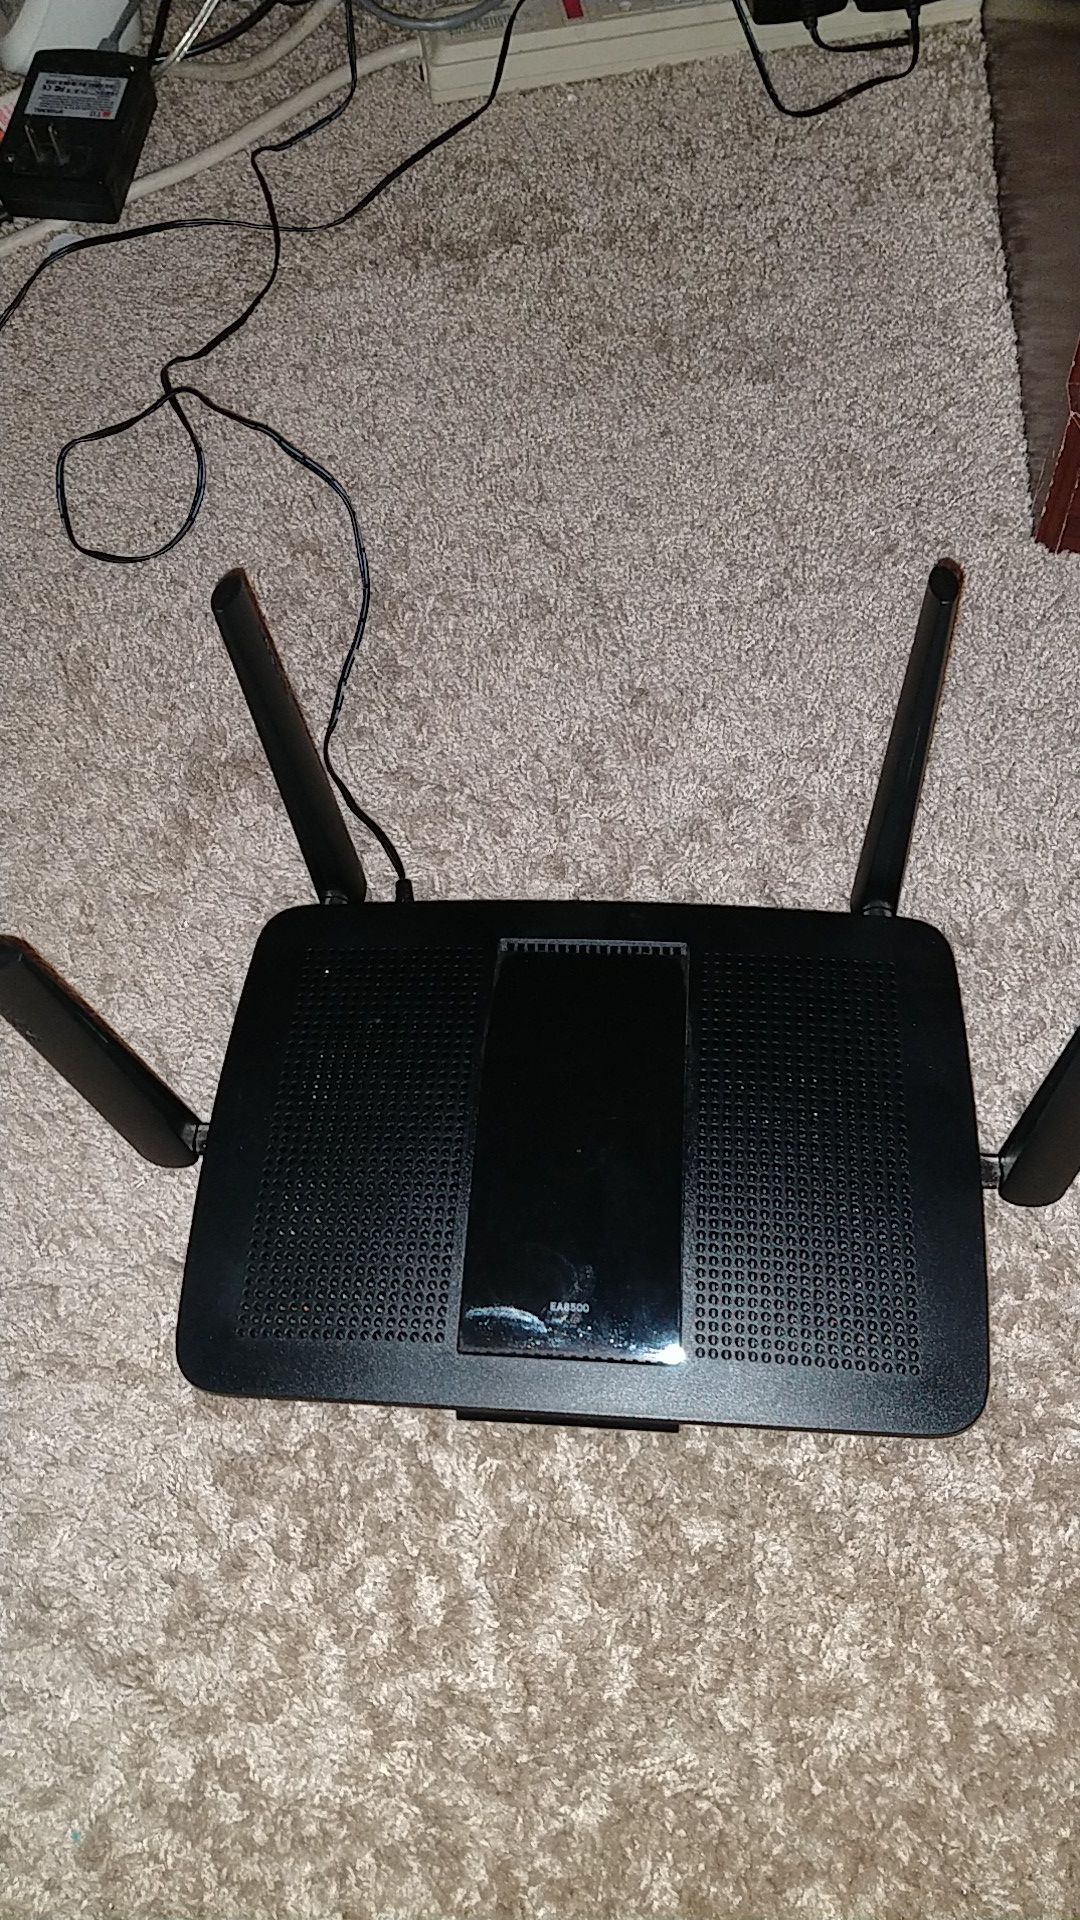 LINKSYS EA8500 Wi-Fi Router